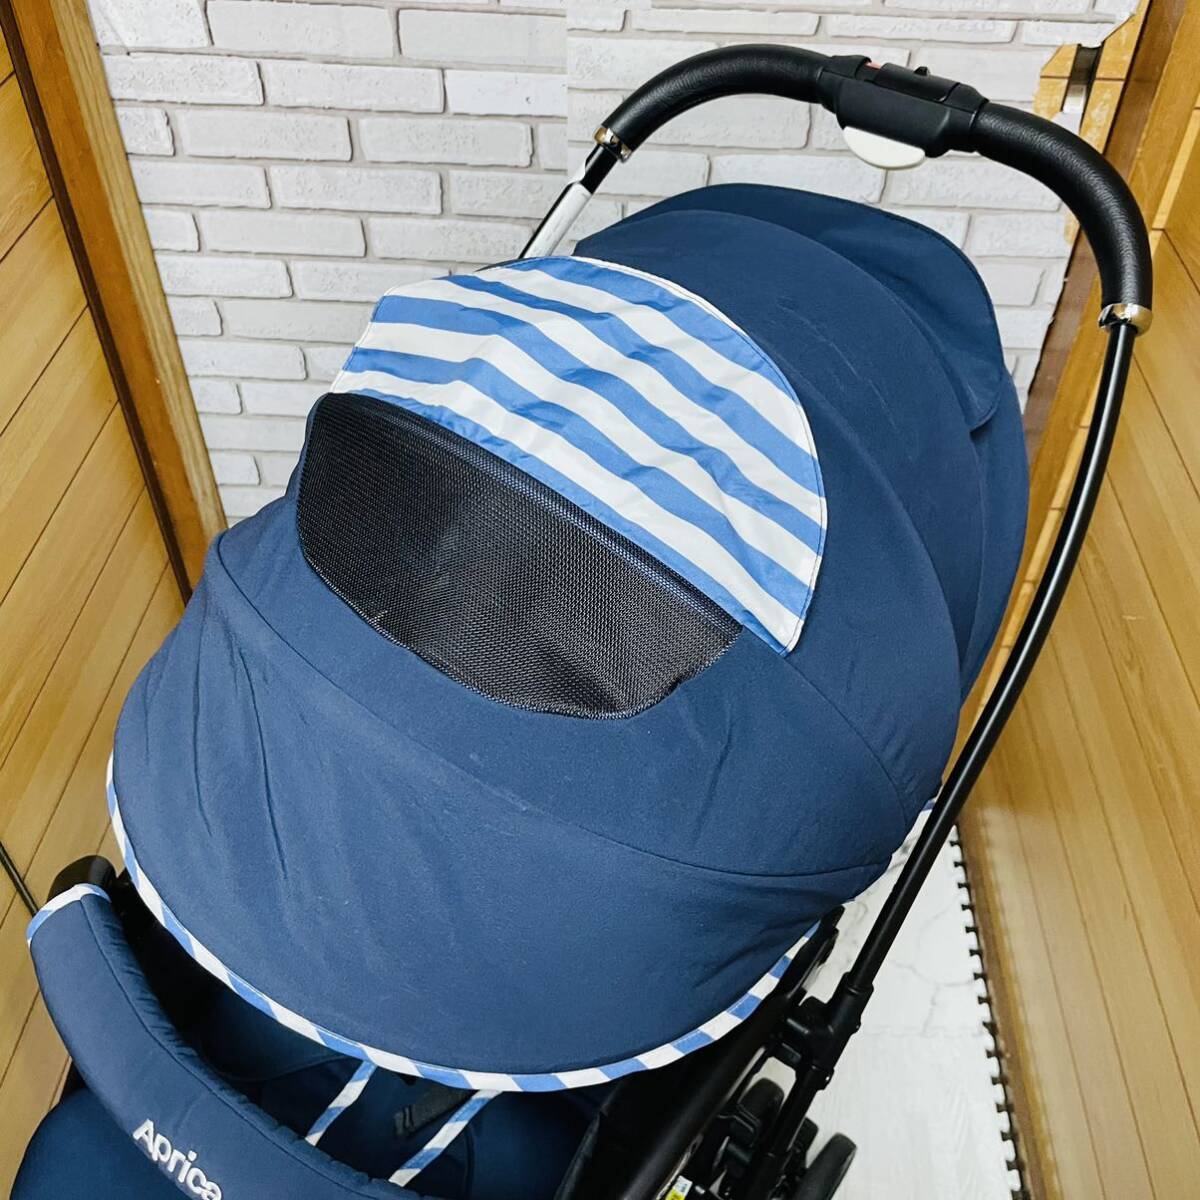  prompt decision use 4 months beautiful goods Aprica la Koo na air AC stroller postage included lavatory settled 5000 jpy . discounted first come, first served lavatory settled Aprica